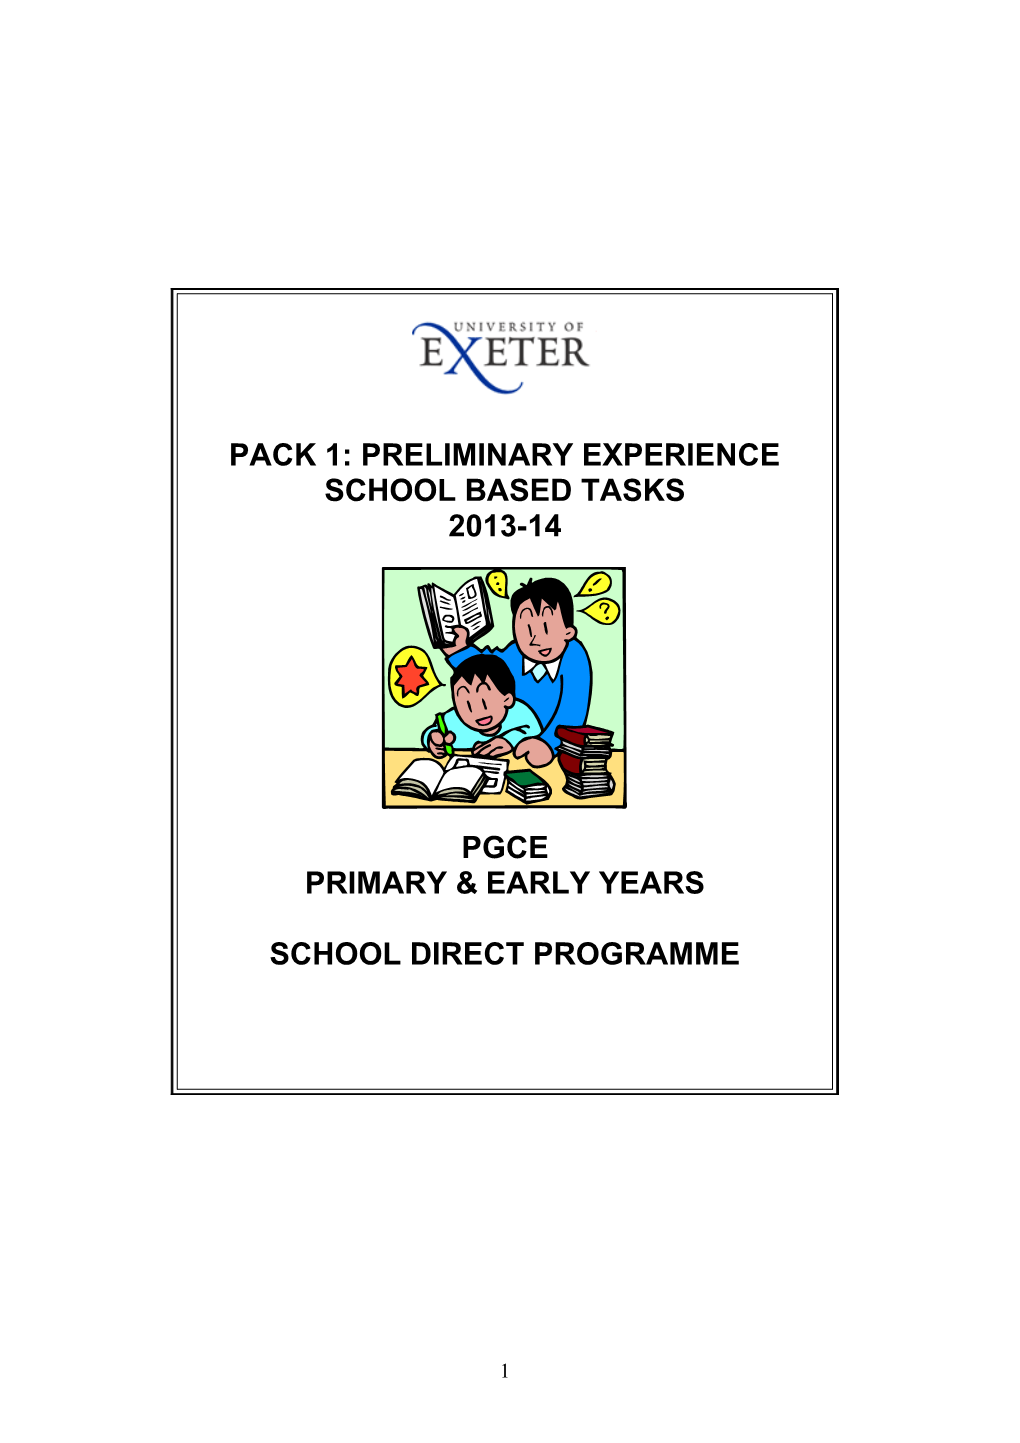 Primary & Early Years PGCE 2013-14